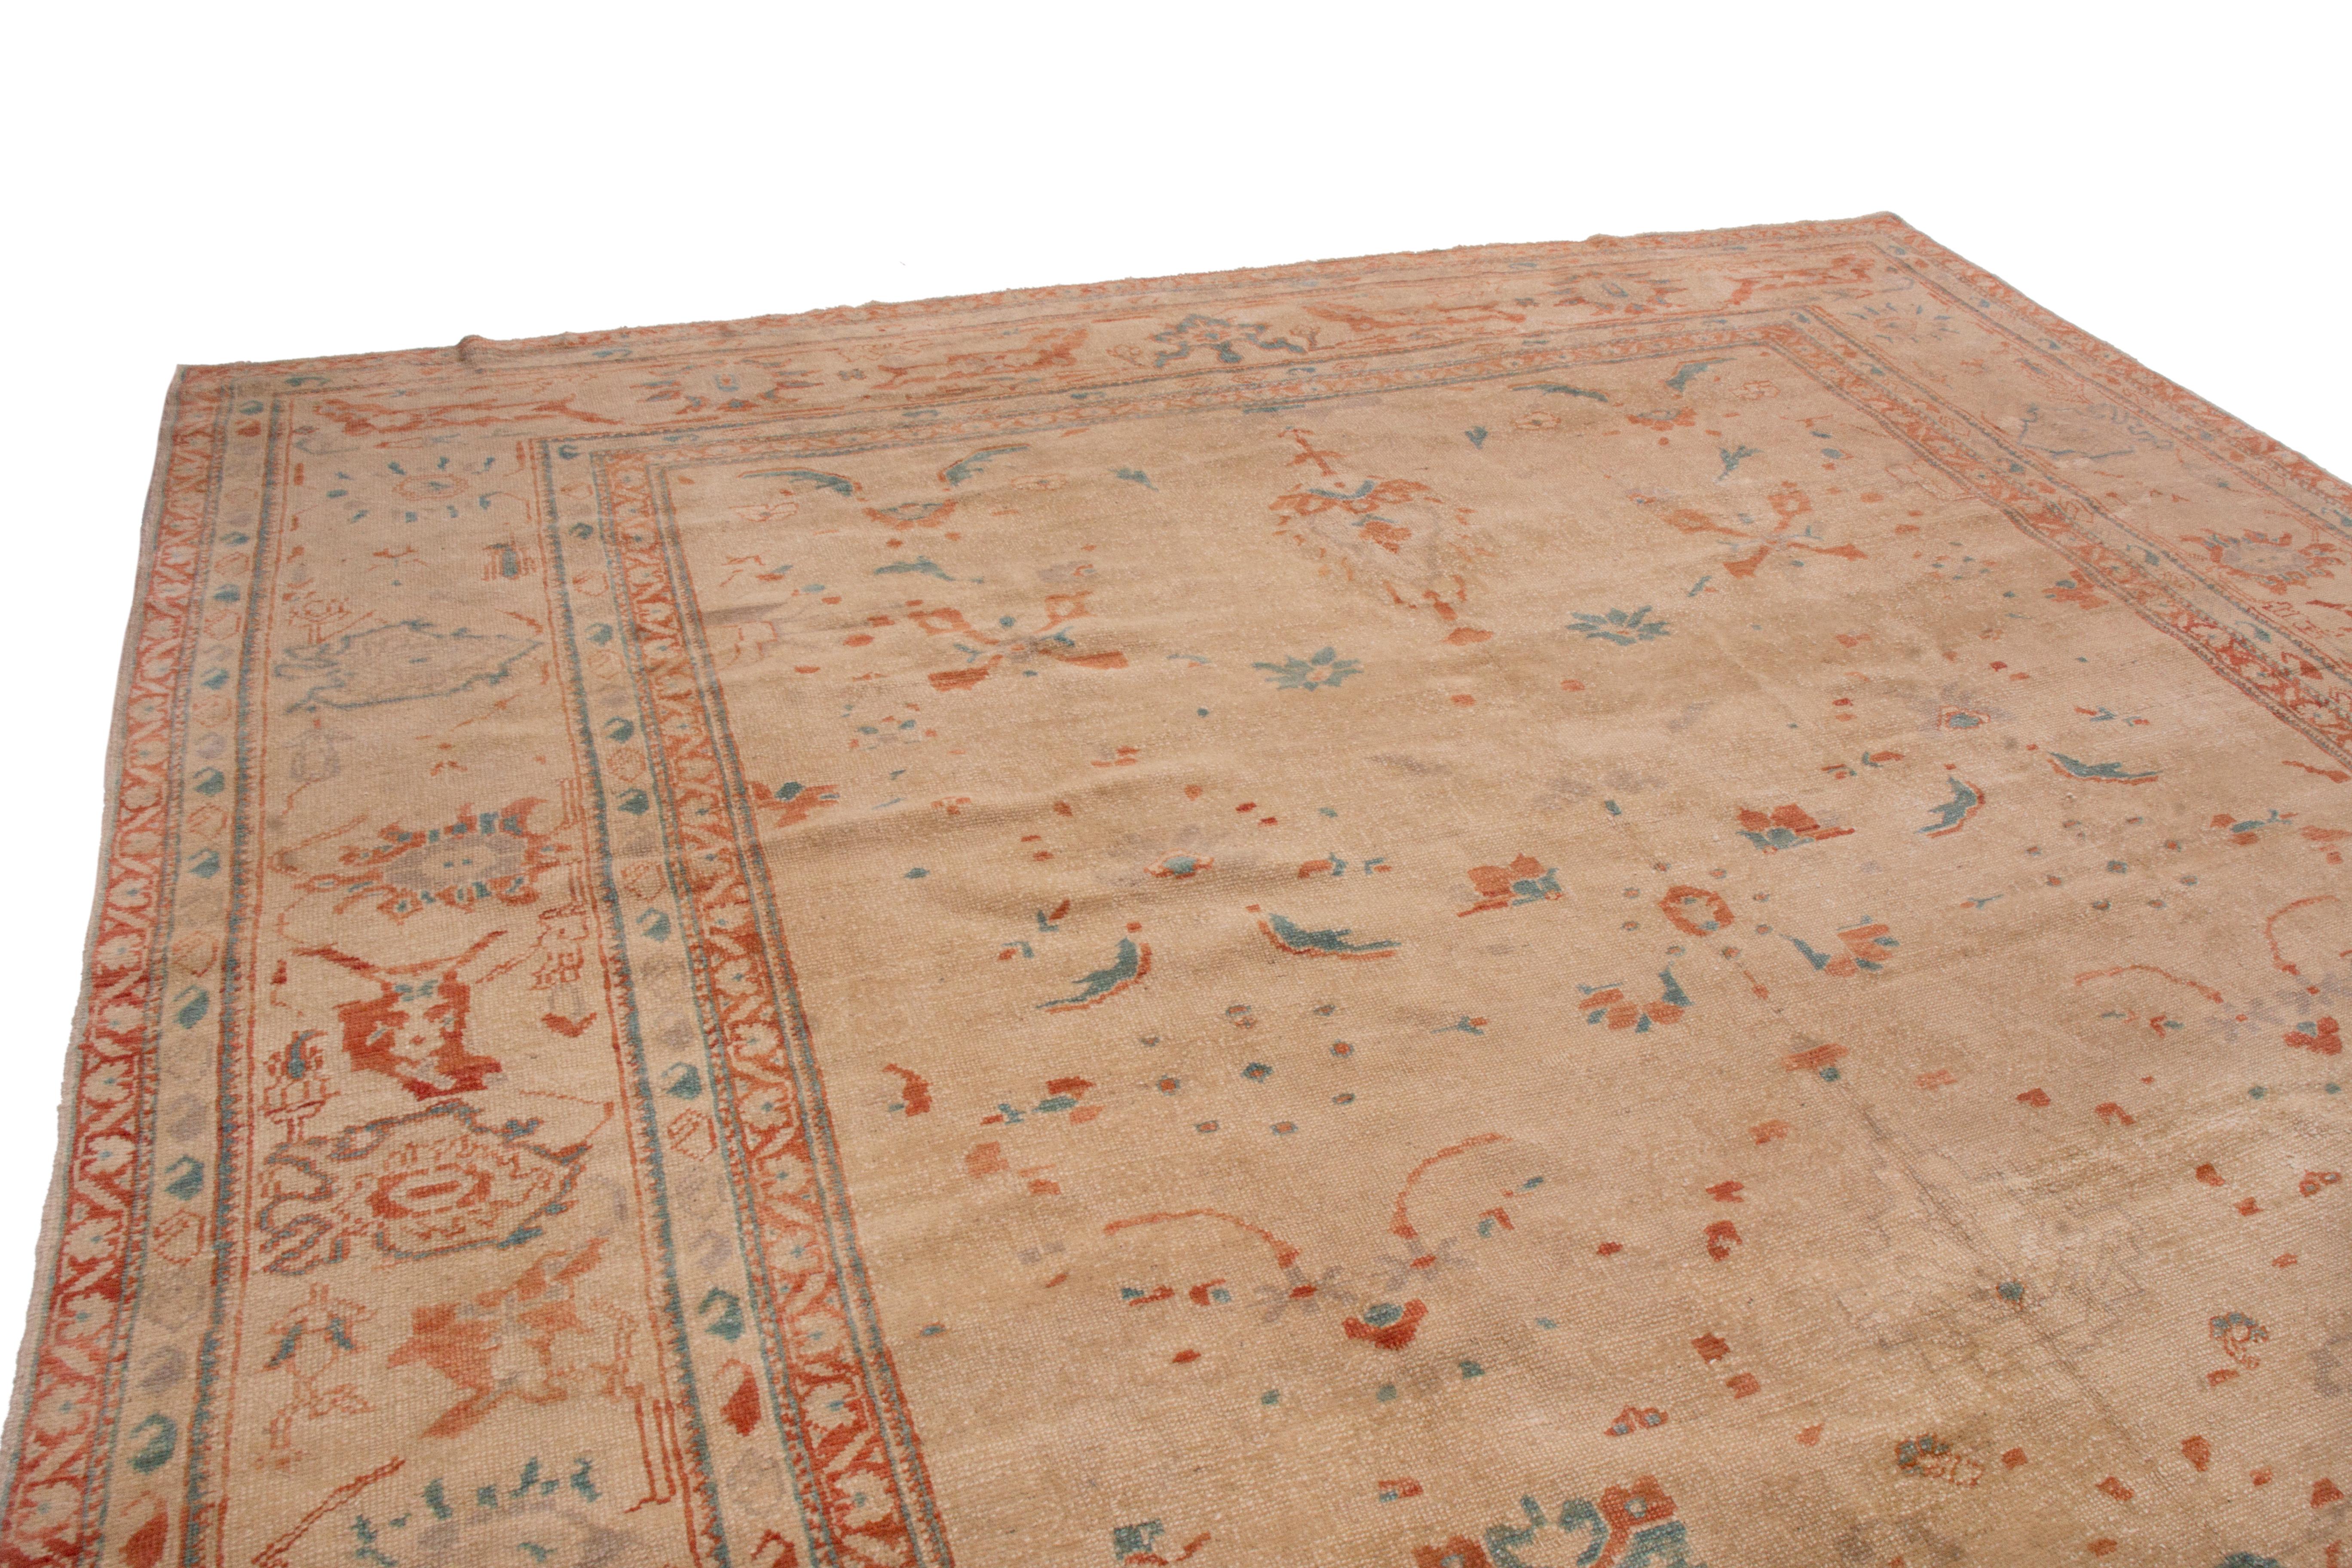 This transitional Sultanabad wool rug has an all-over geometric-floral pattern. From Turkey in 1980, the field has an almost open design like many Sultanabad families, though the thinner geometric-floral motifs are atypical. Marrying quiet hues of